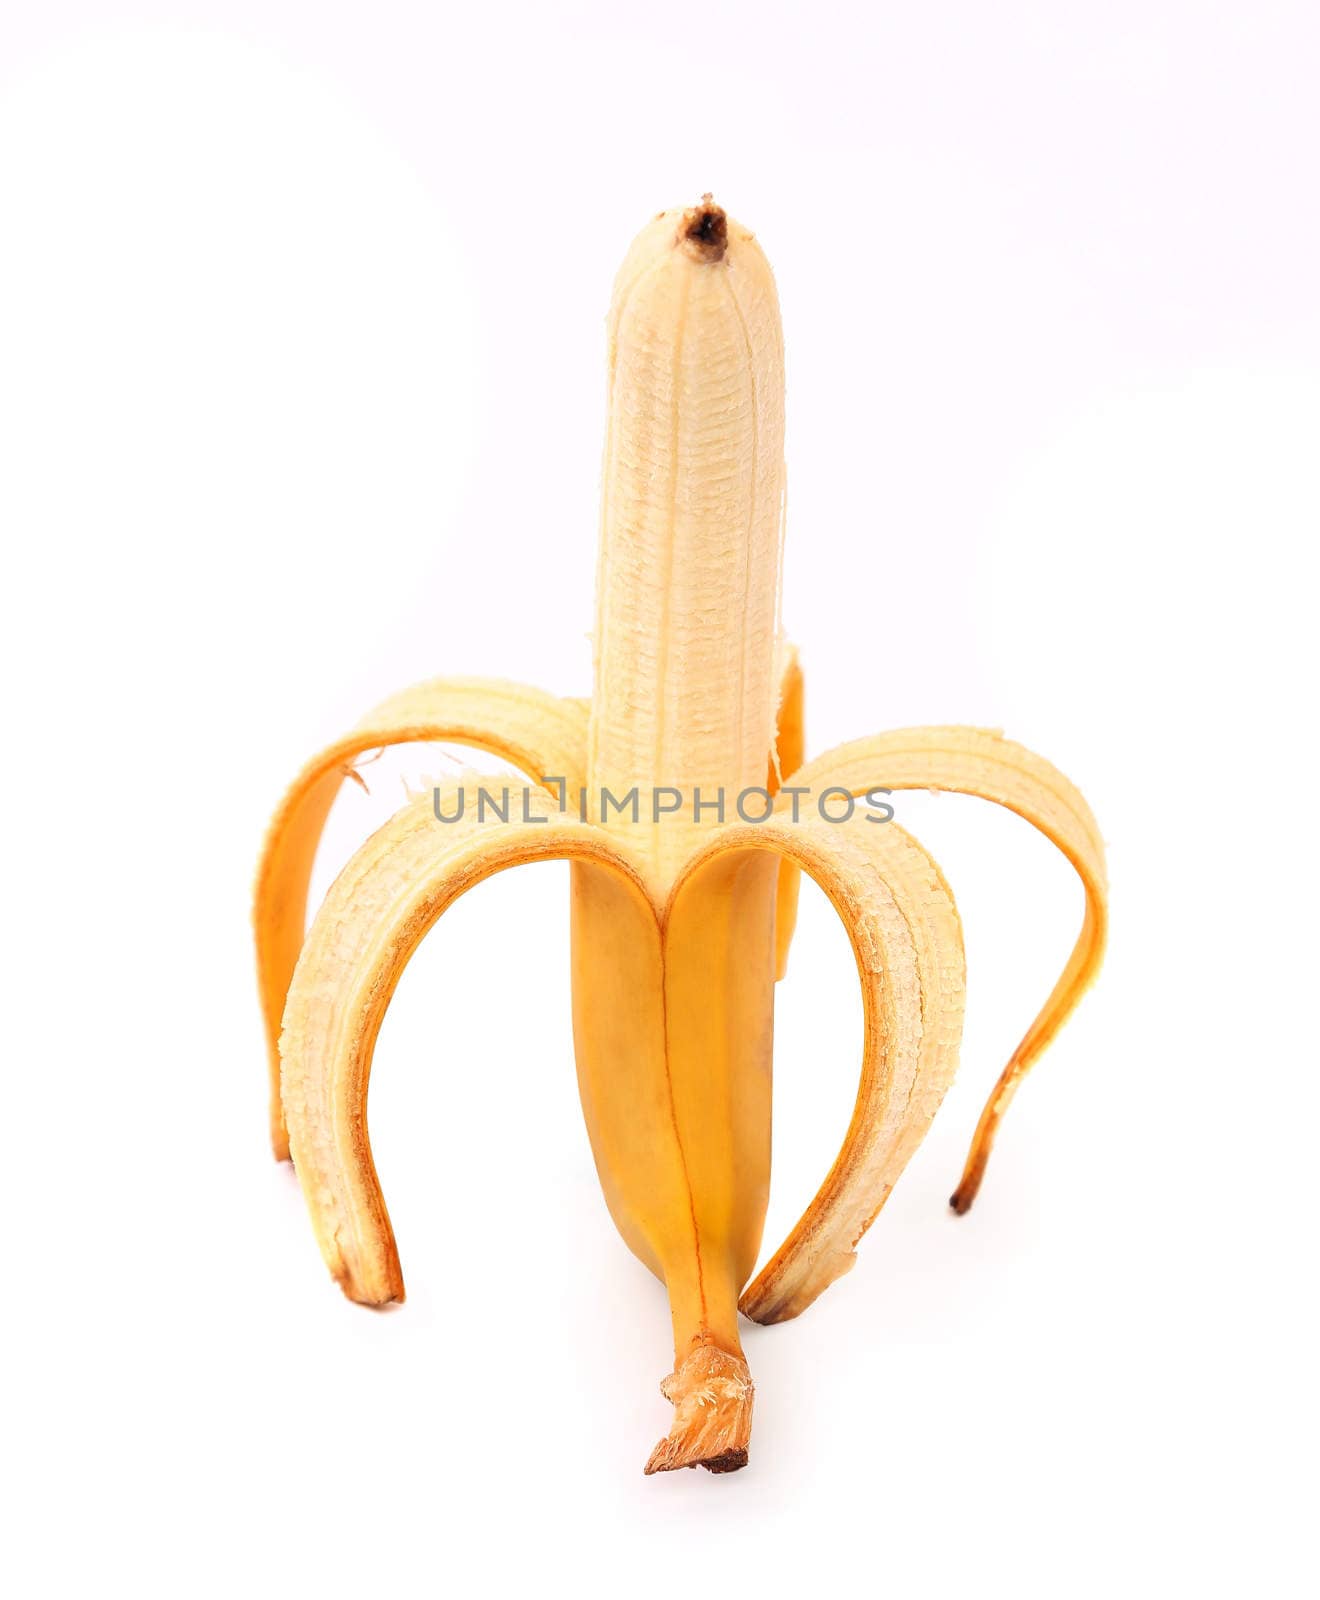 Open banana. Isolated. Close-up. On a white background.